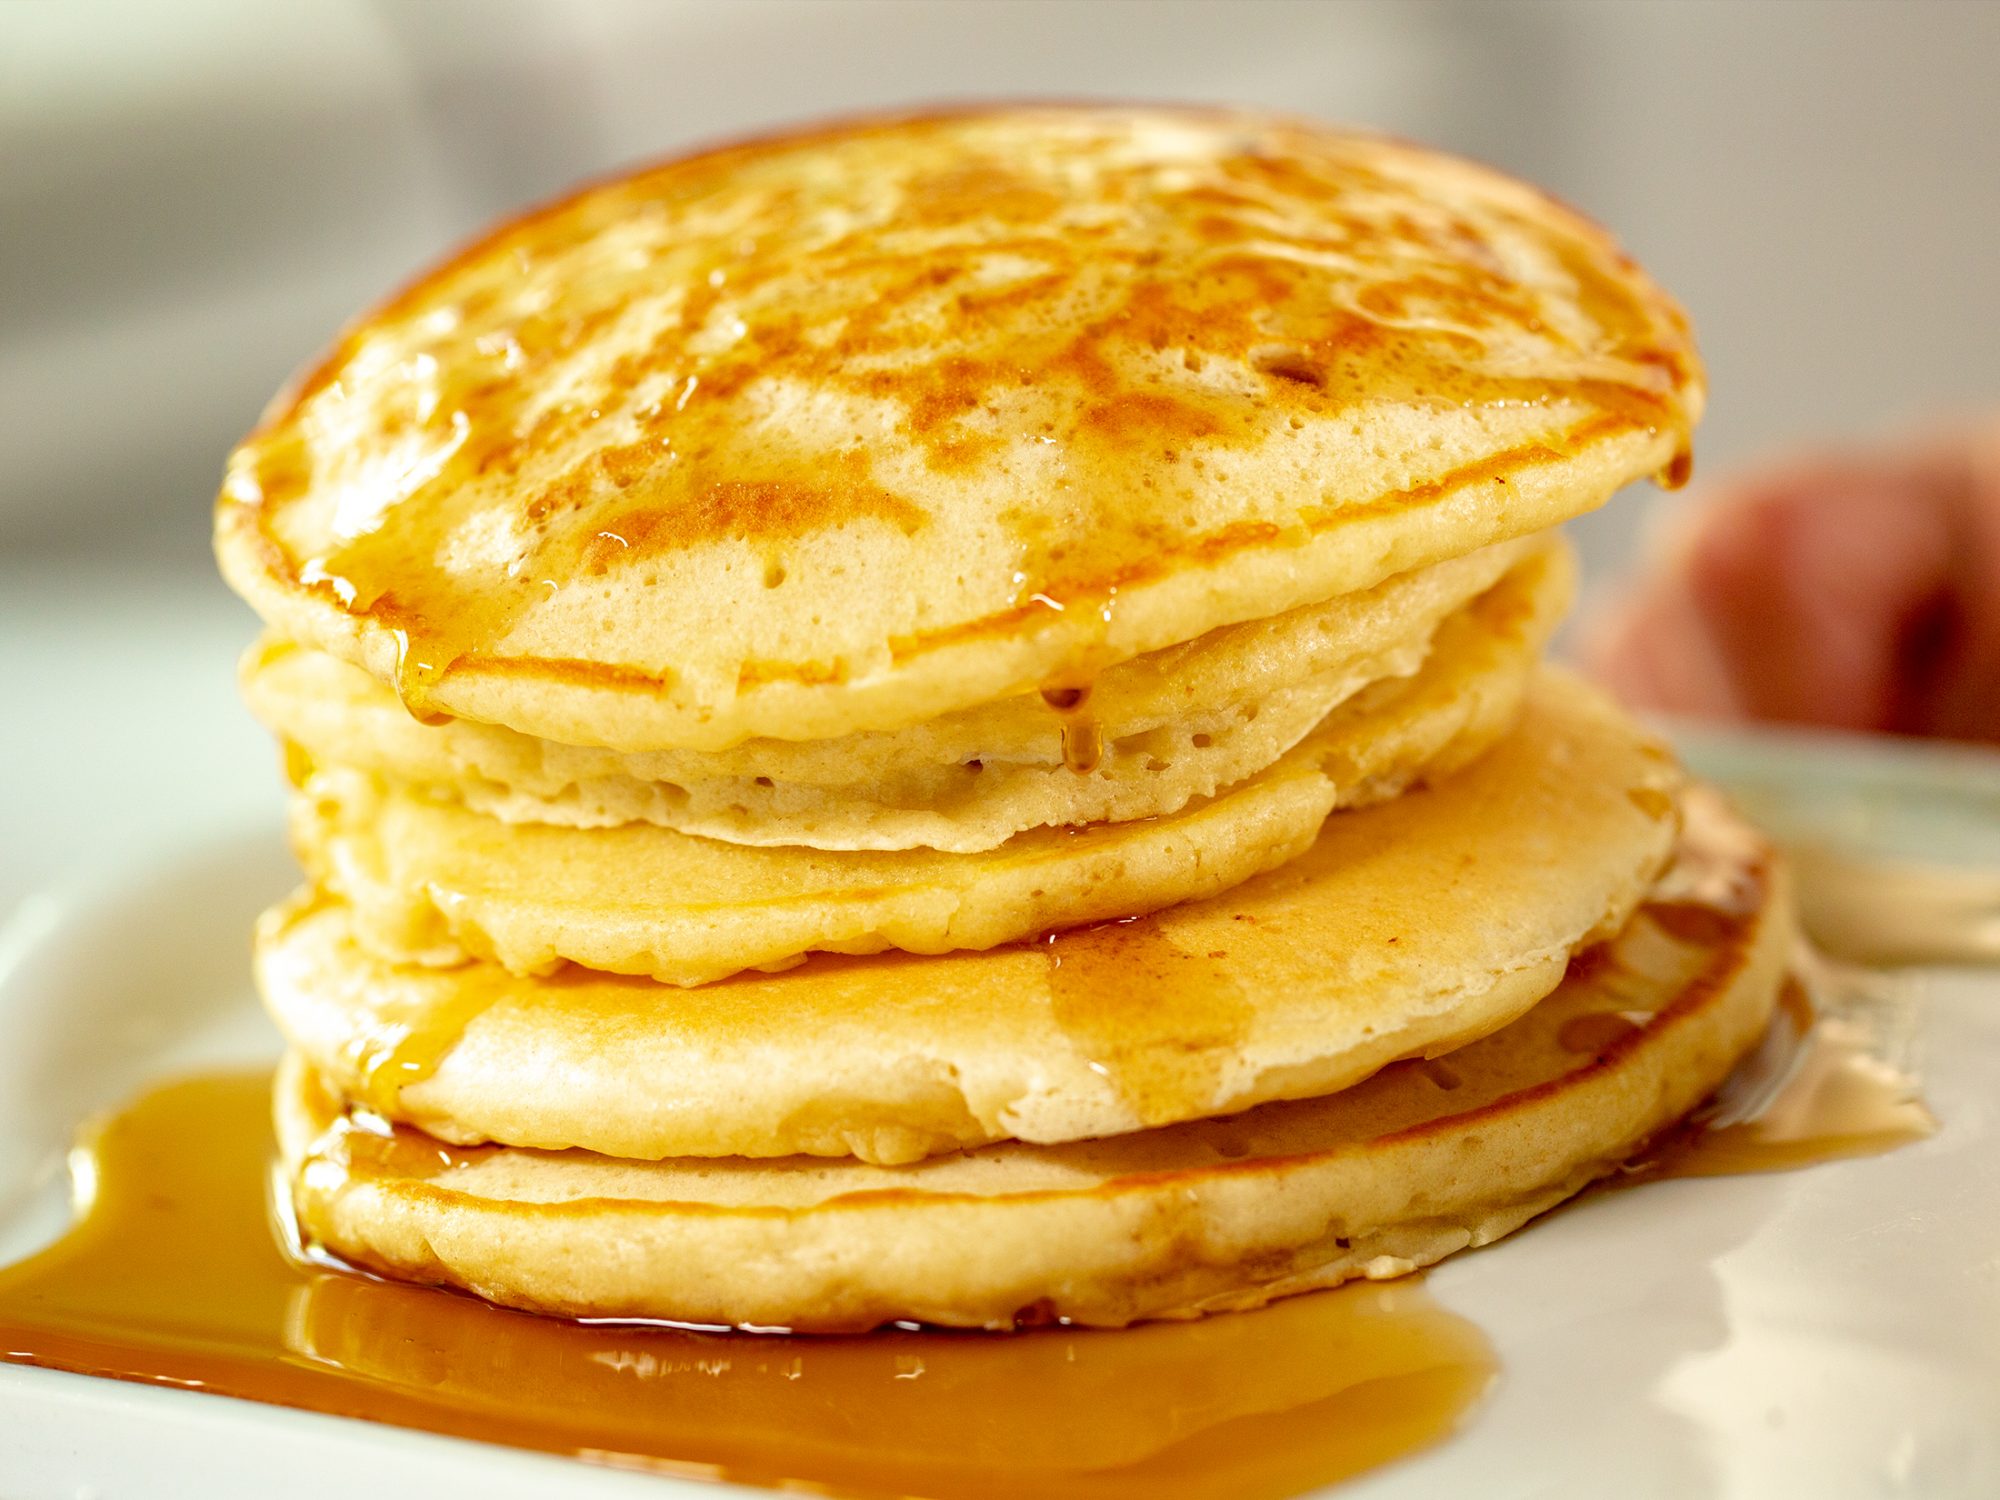 https://static.onecms.io/wp-content/uploads/sites/19/2019/10/08/fluffy-pancakes-dcms-large-2000.jpg